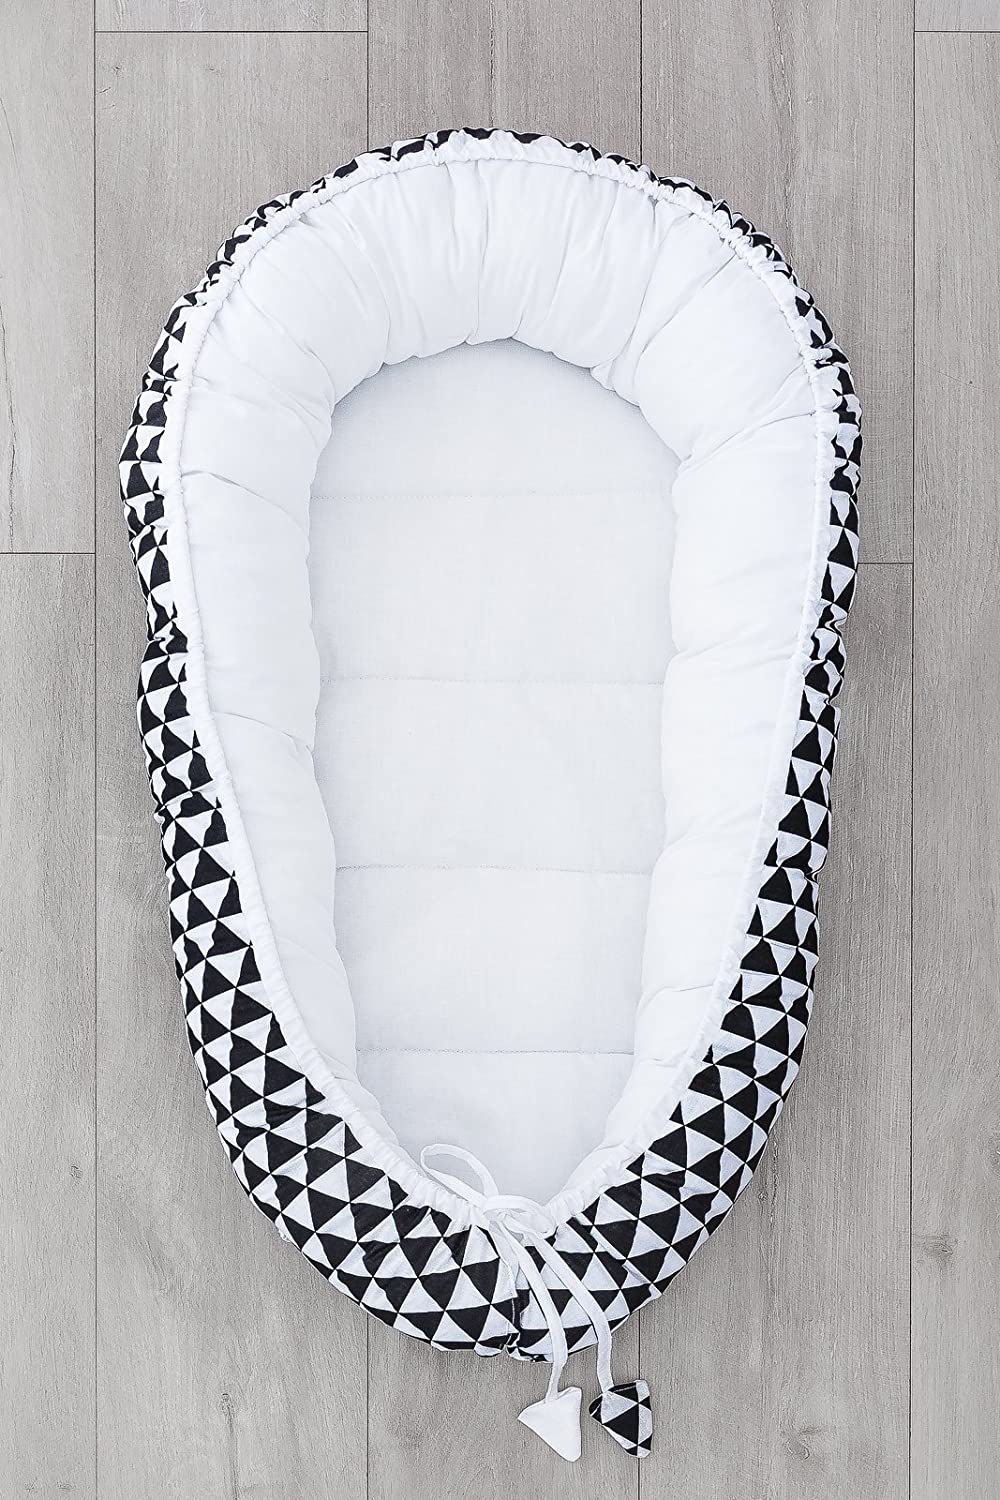 LOOLAY® Cot bumper cocoon 2-sided baby cot bumper baby cocoon cuddly bed baby travel cot (triangles black/white)